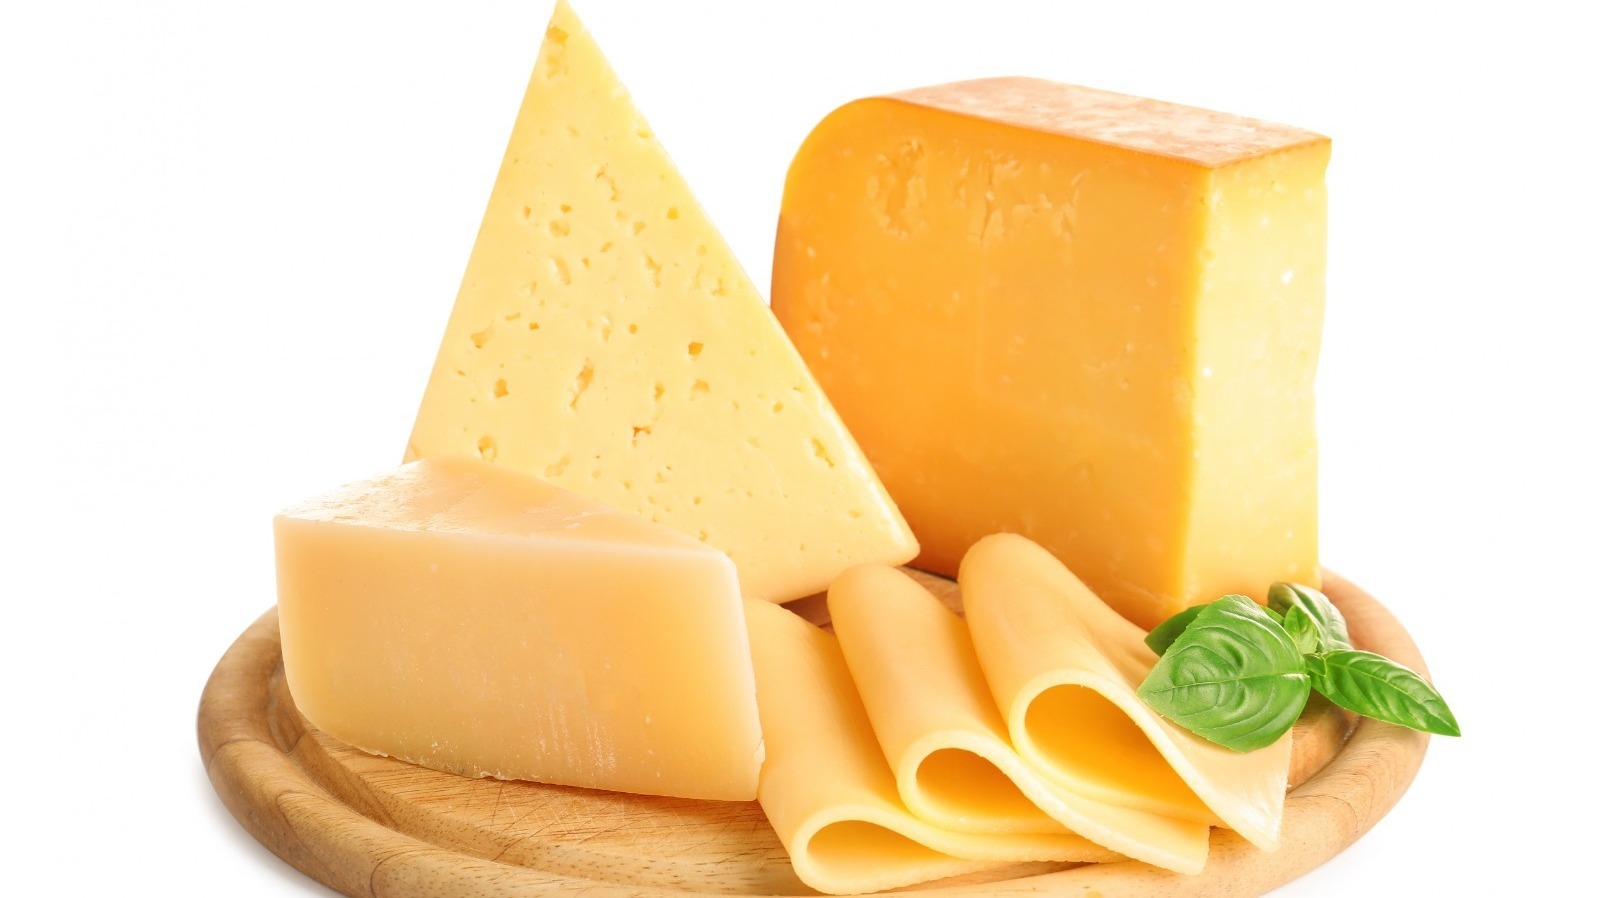 https://www.mashed.com/img/gallery/the-reason-cheddar-cheese-isnt-naturally-yellow/l-intro-1650051084.jpg